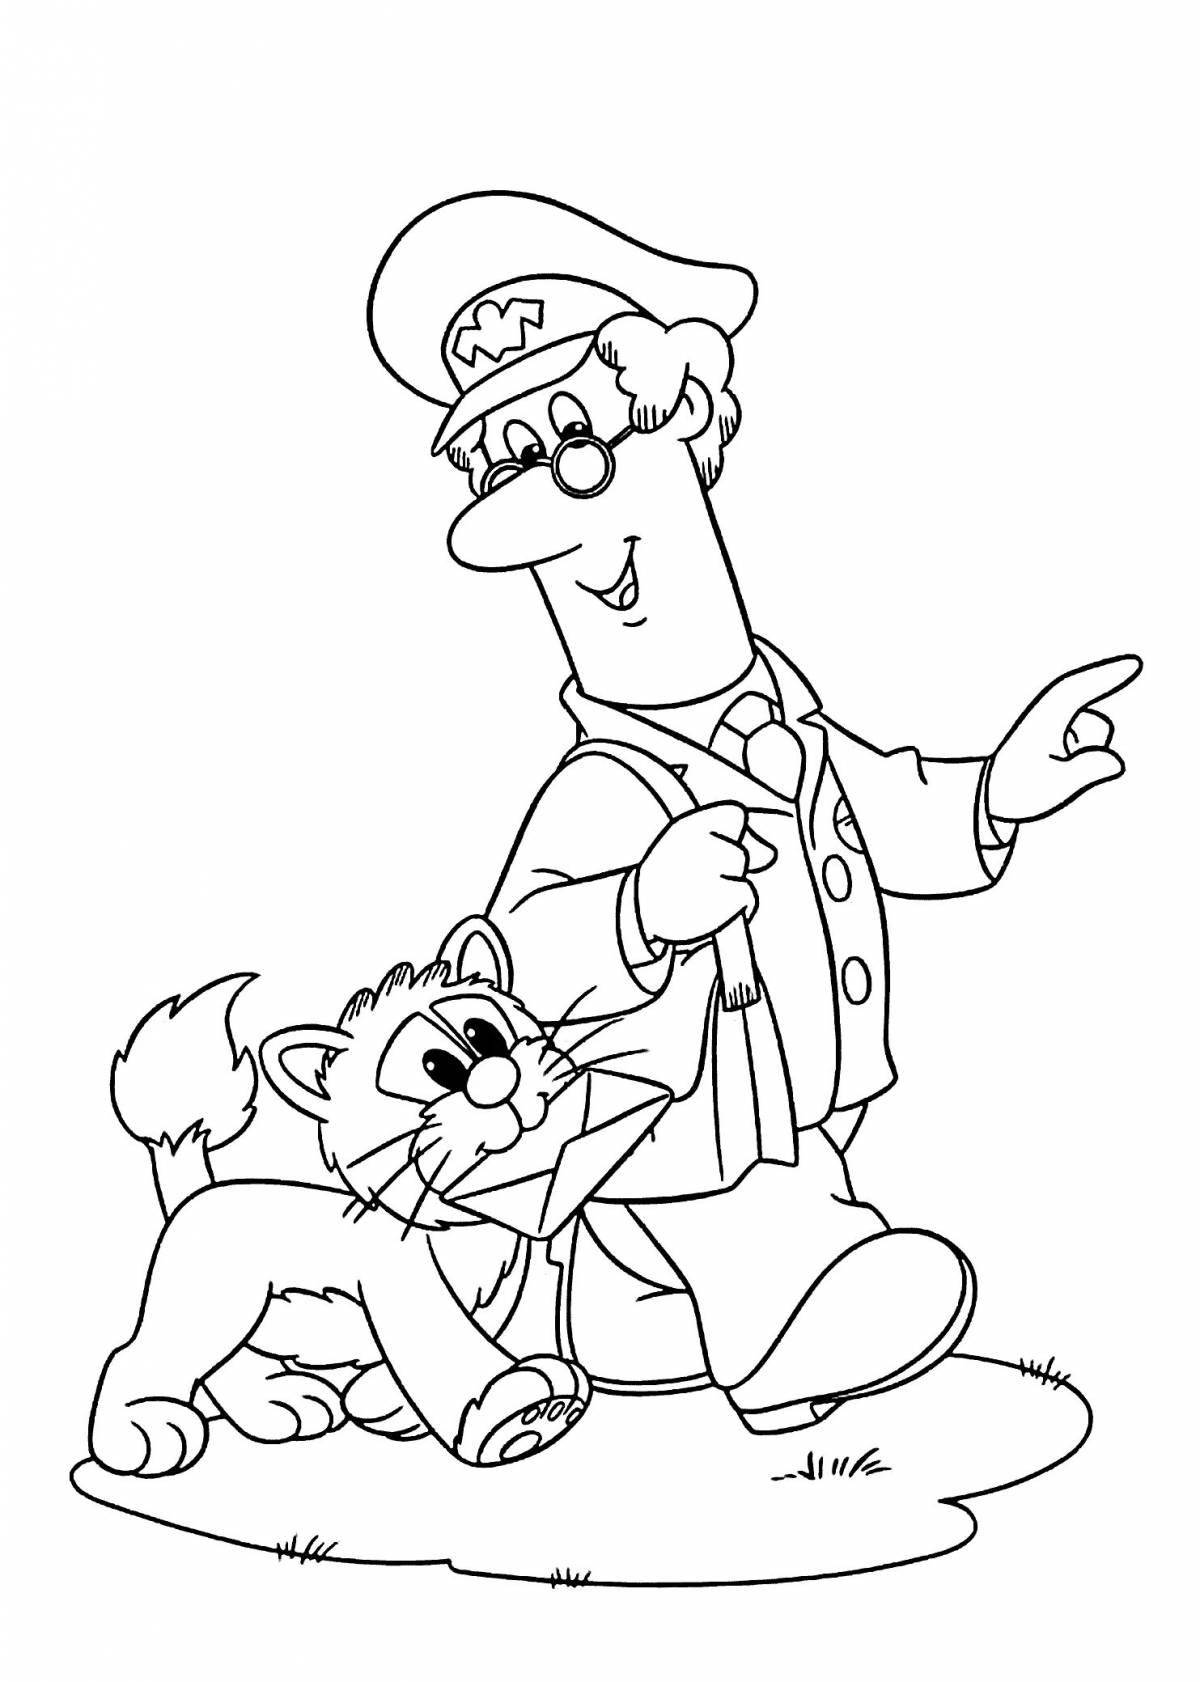 Coloring page cheerful Pechkin postman for preschoolers